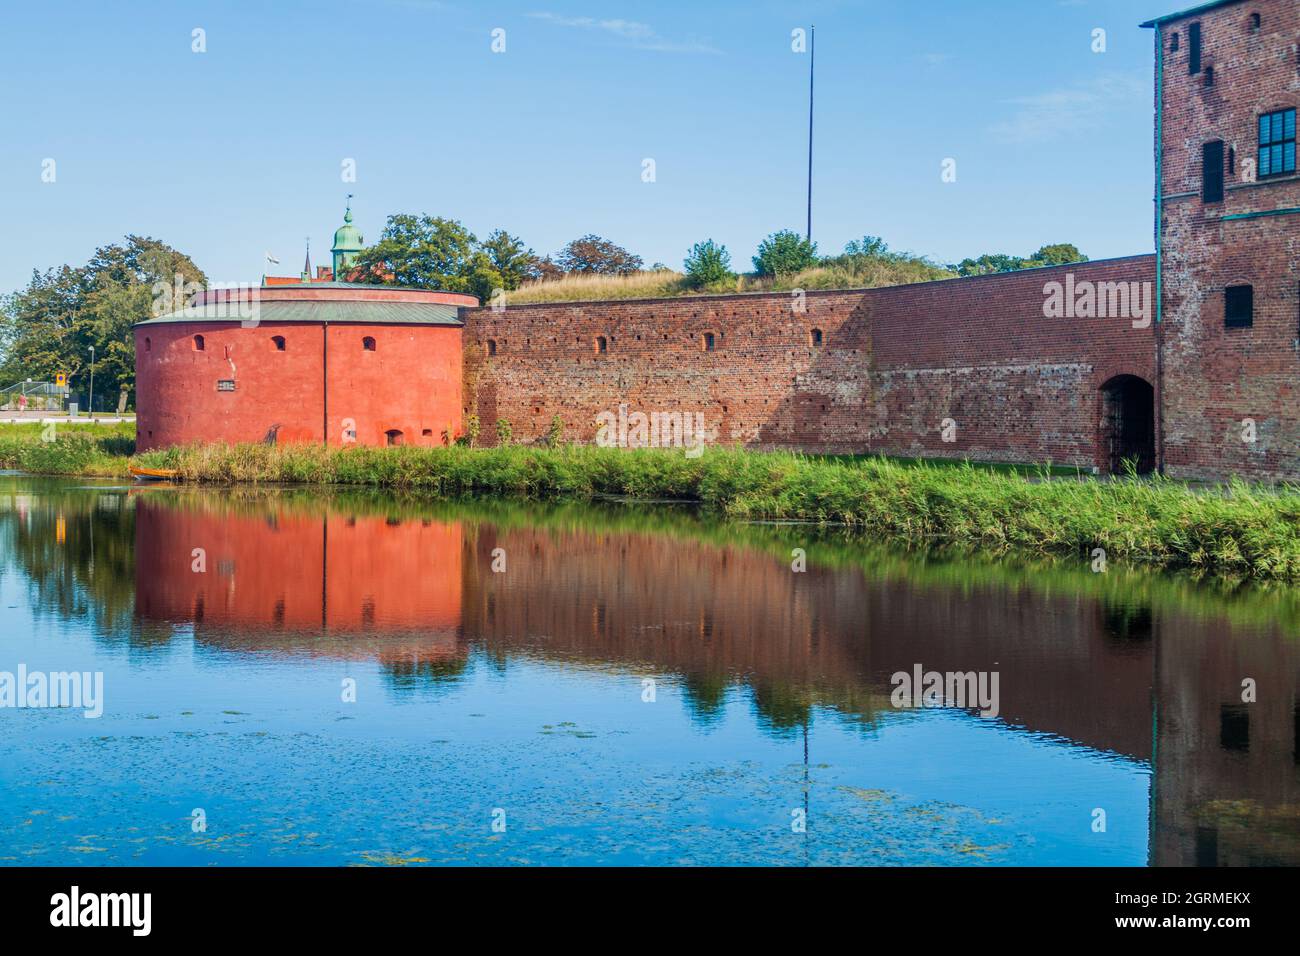 Fortification walls of Malmo Castle reflecting in its moat, Sweden Stock Photo